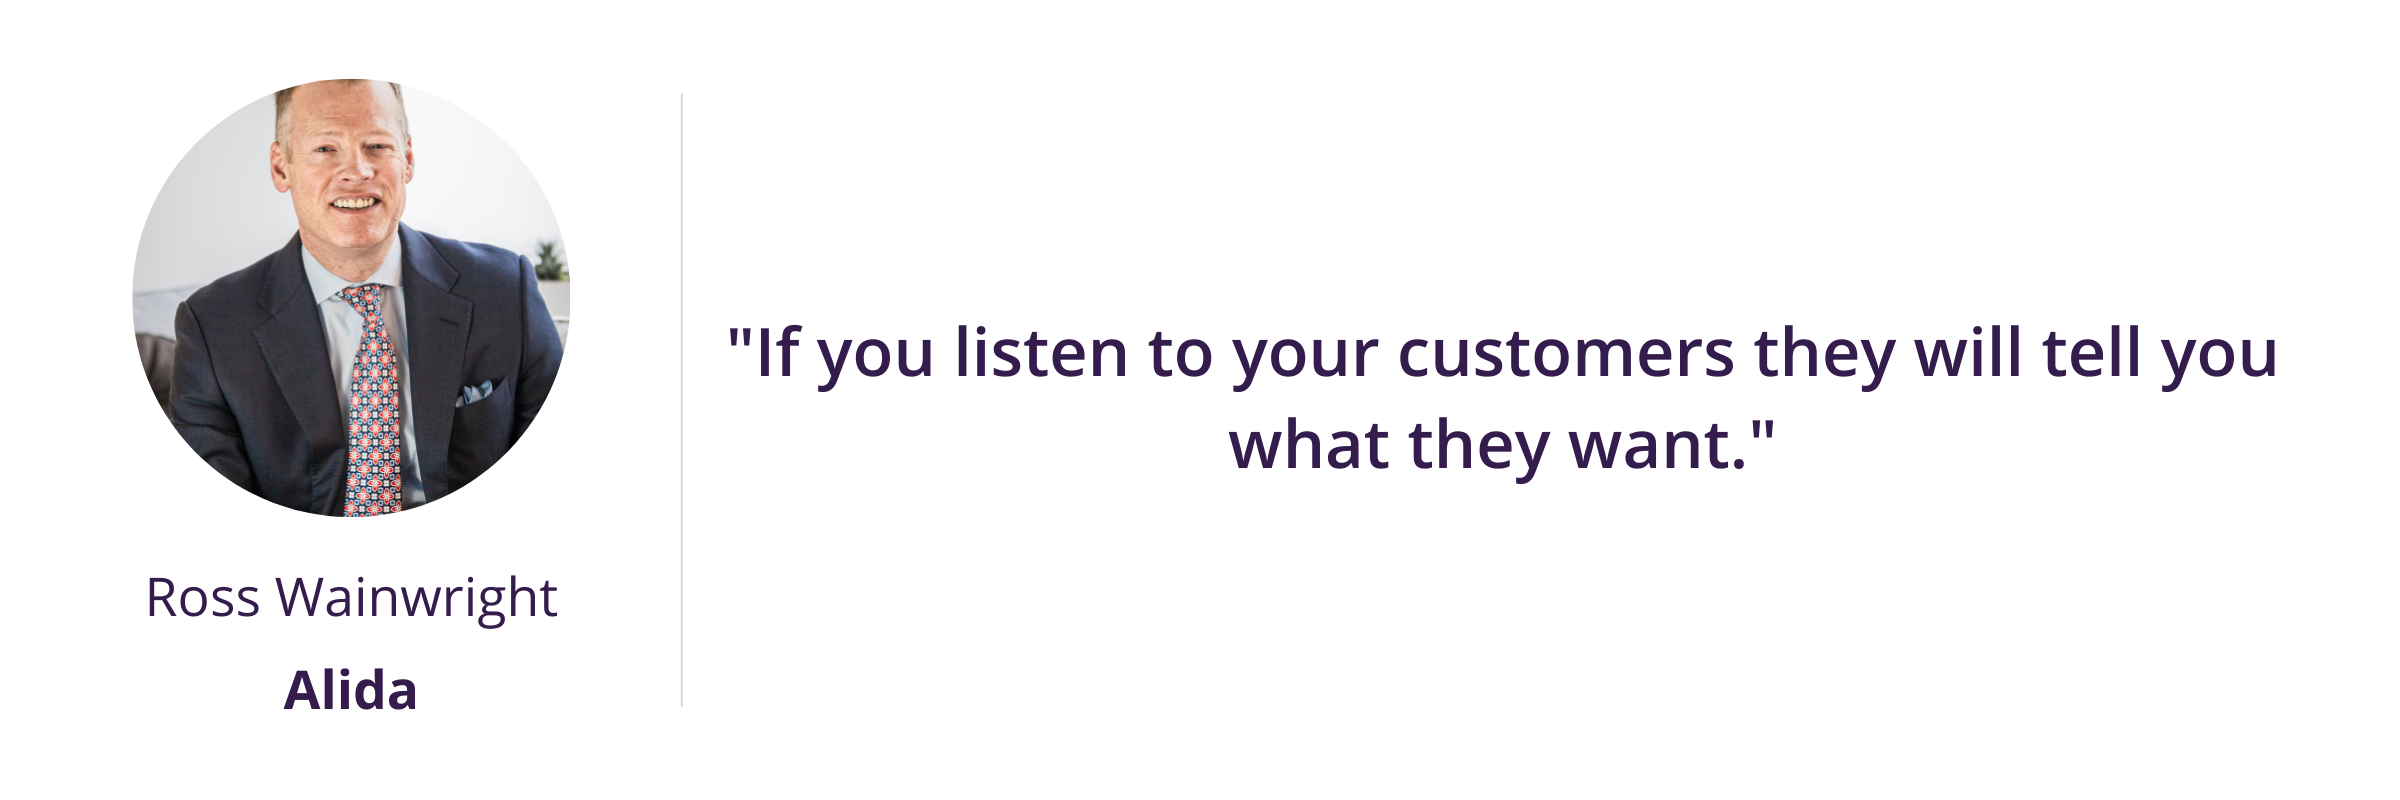 "If you listen to your customers they will tell you what they want."